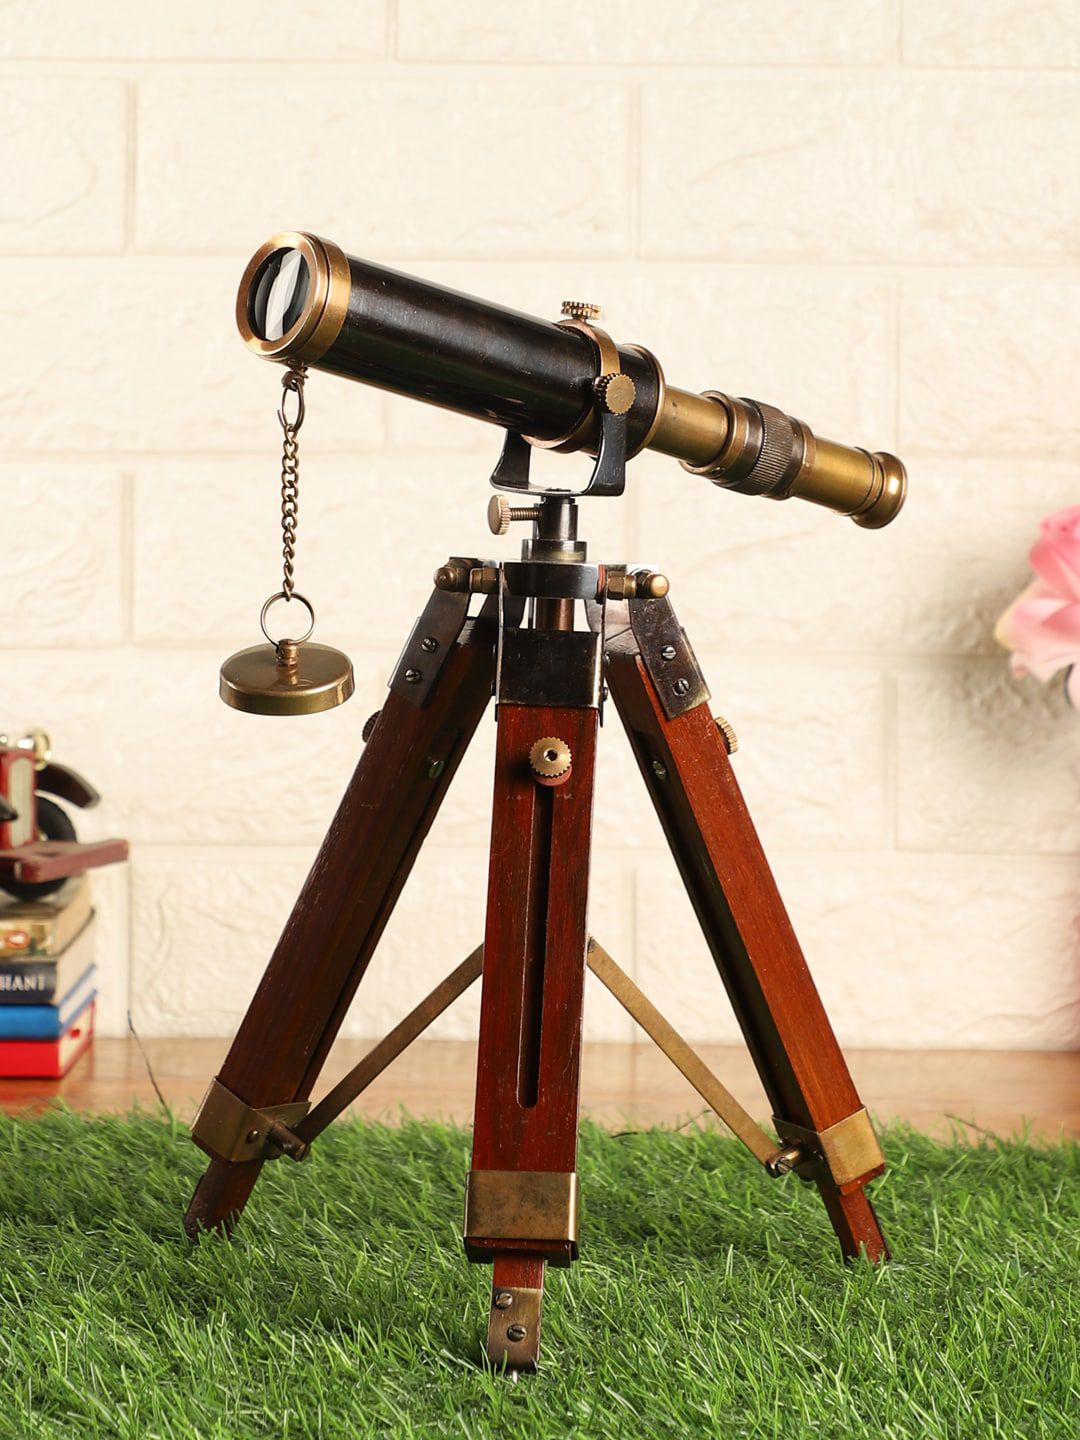 EXIM DECOR Black & Gold-Toned Antique Telescope With Wooden Tripod Stand Price in India